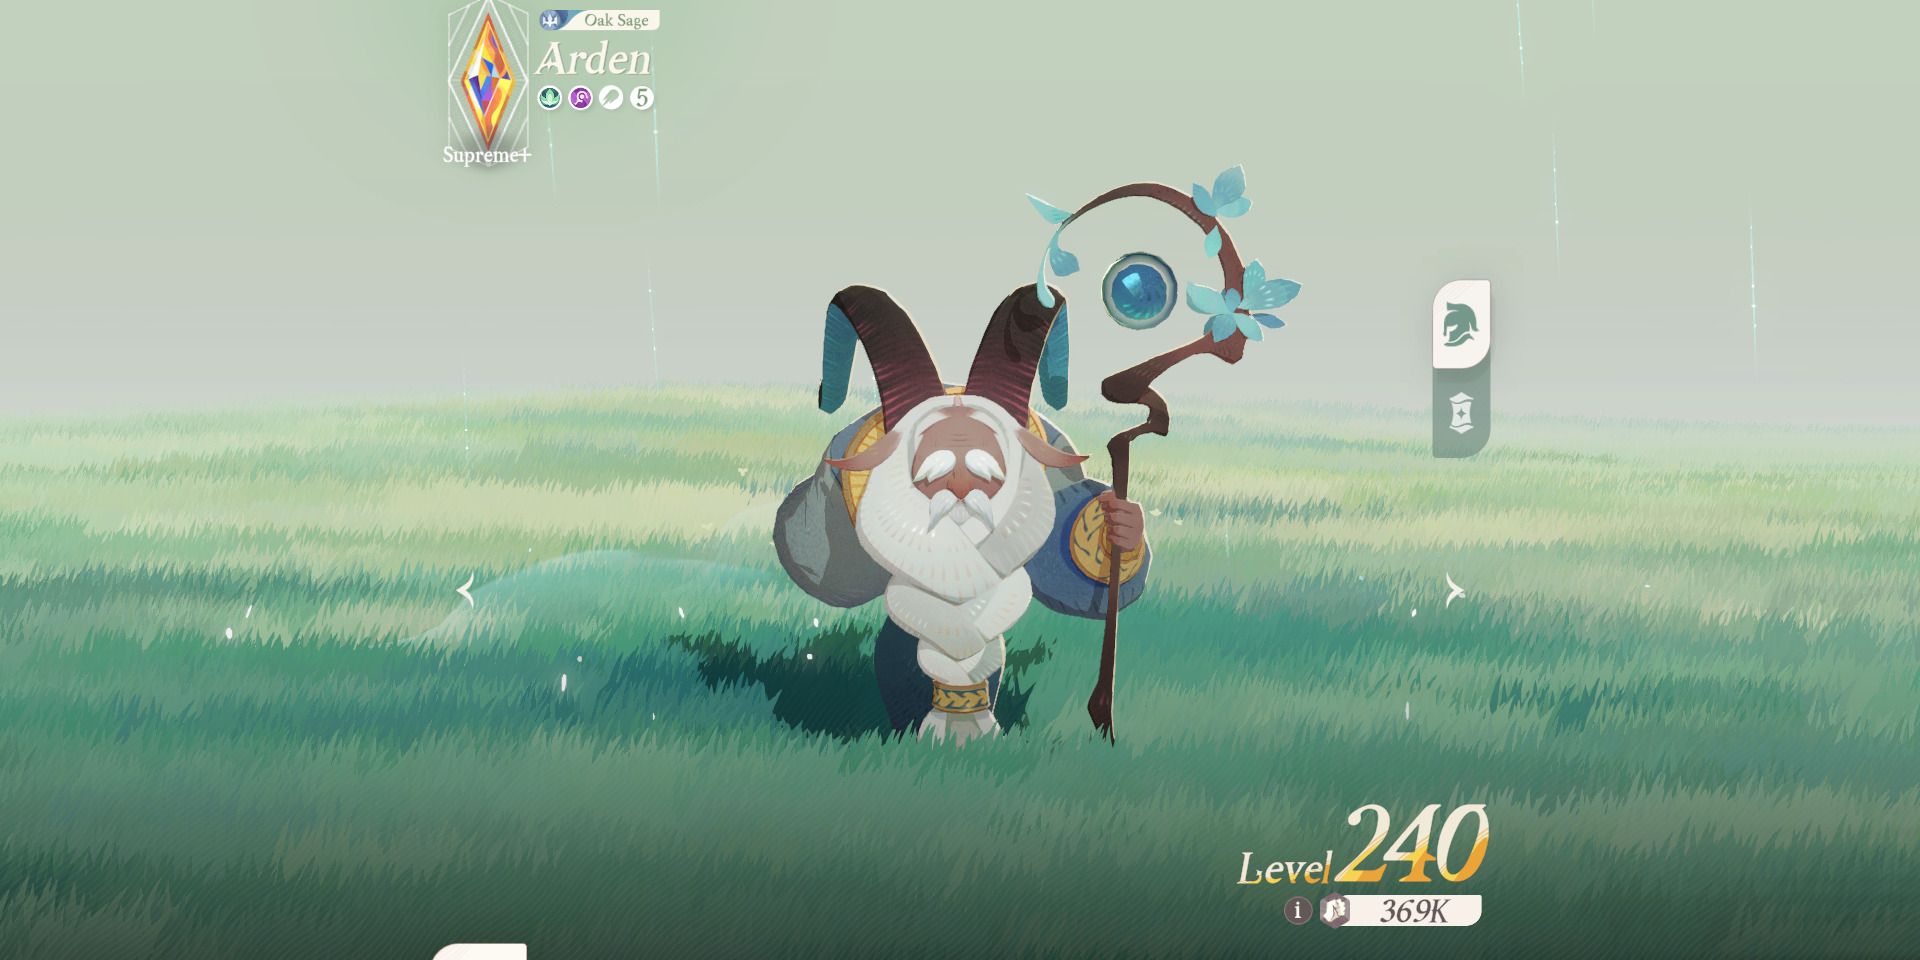 Image of the mage character Arden in AFK Journey